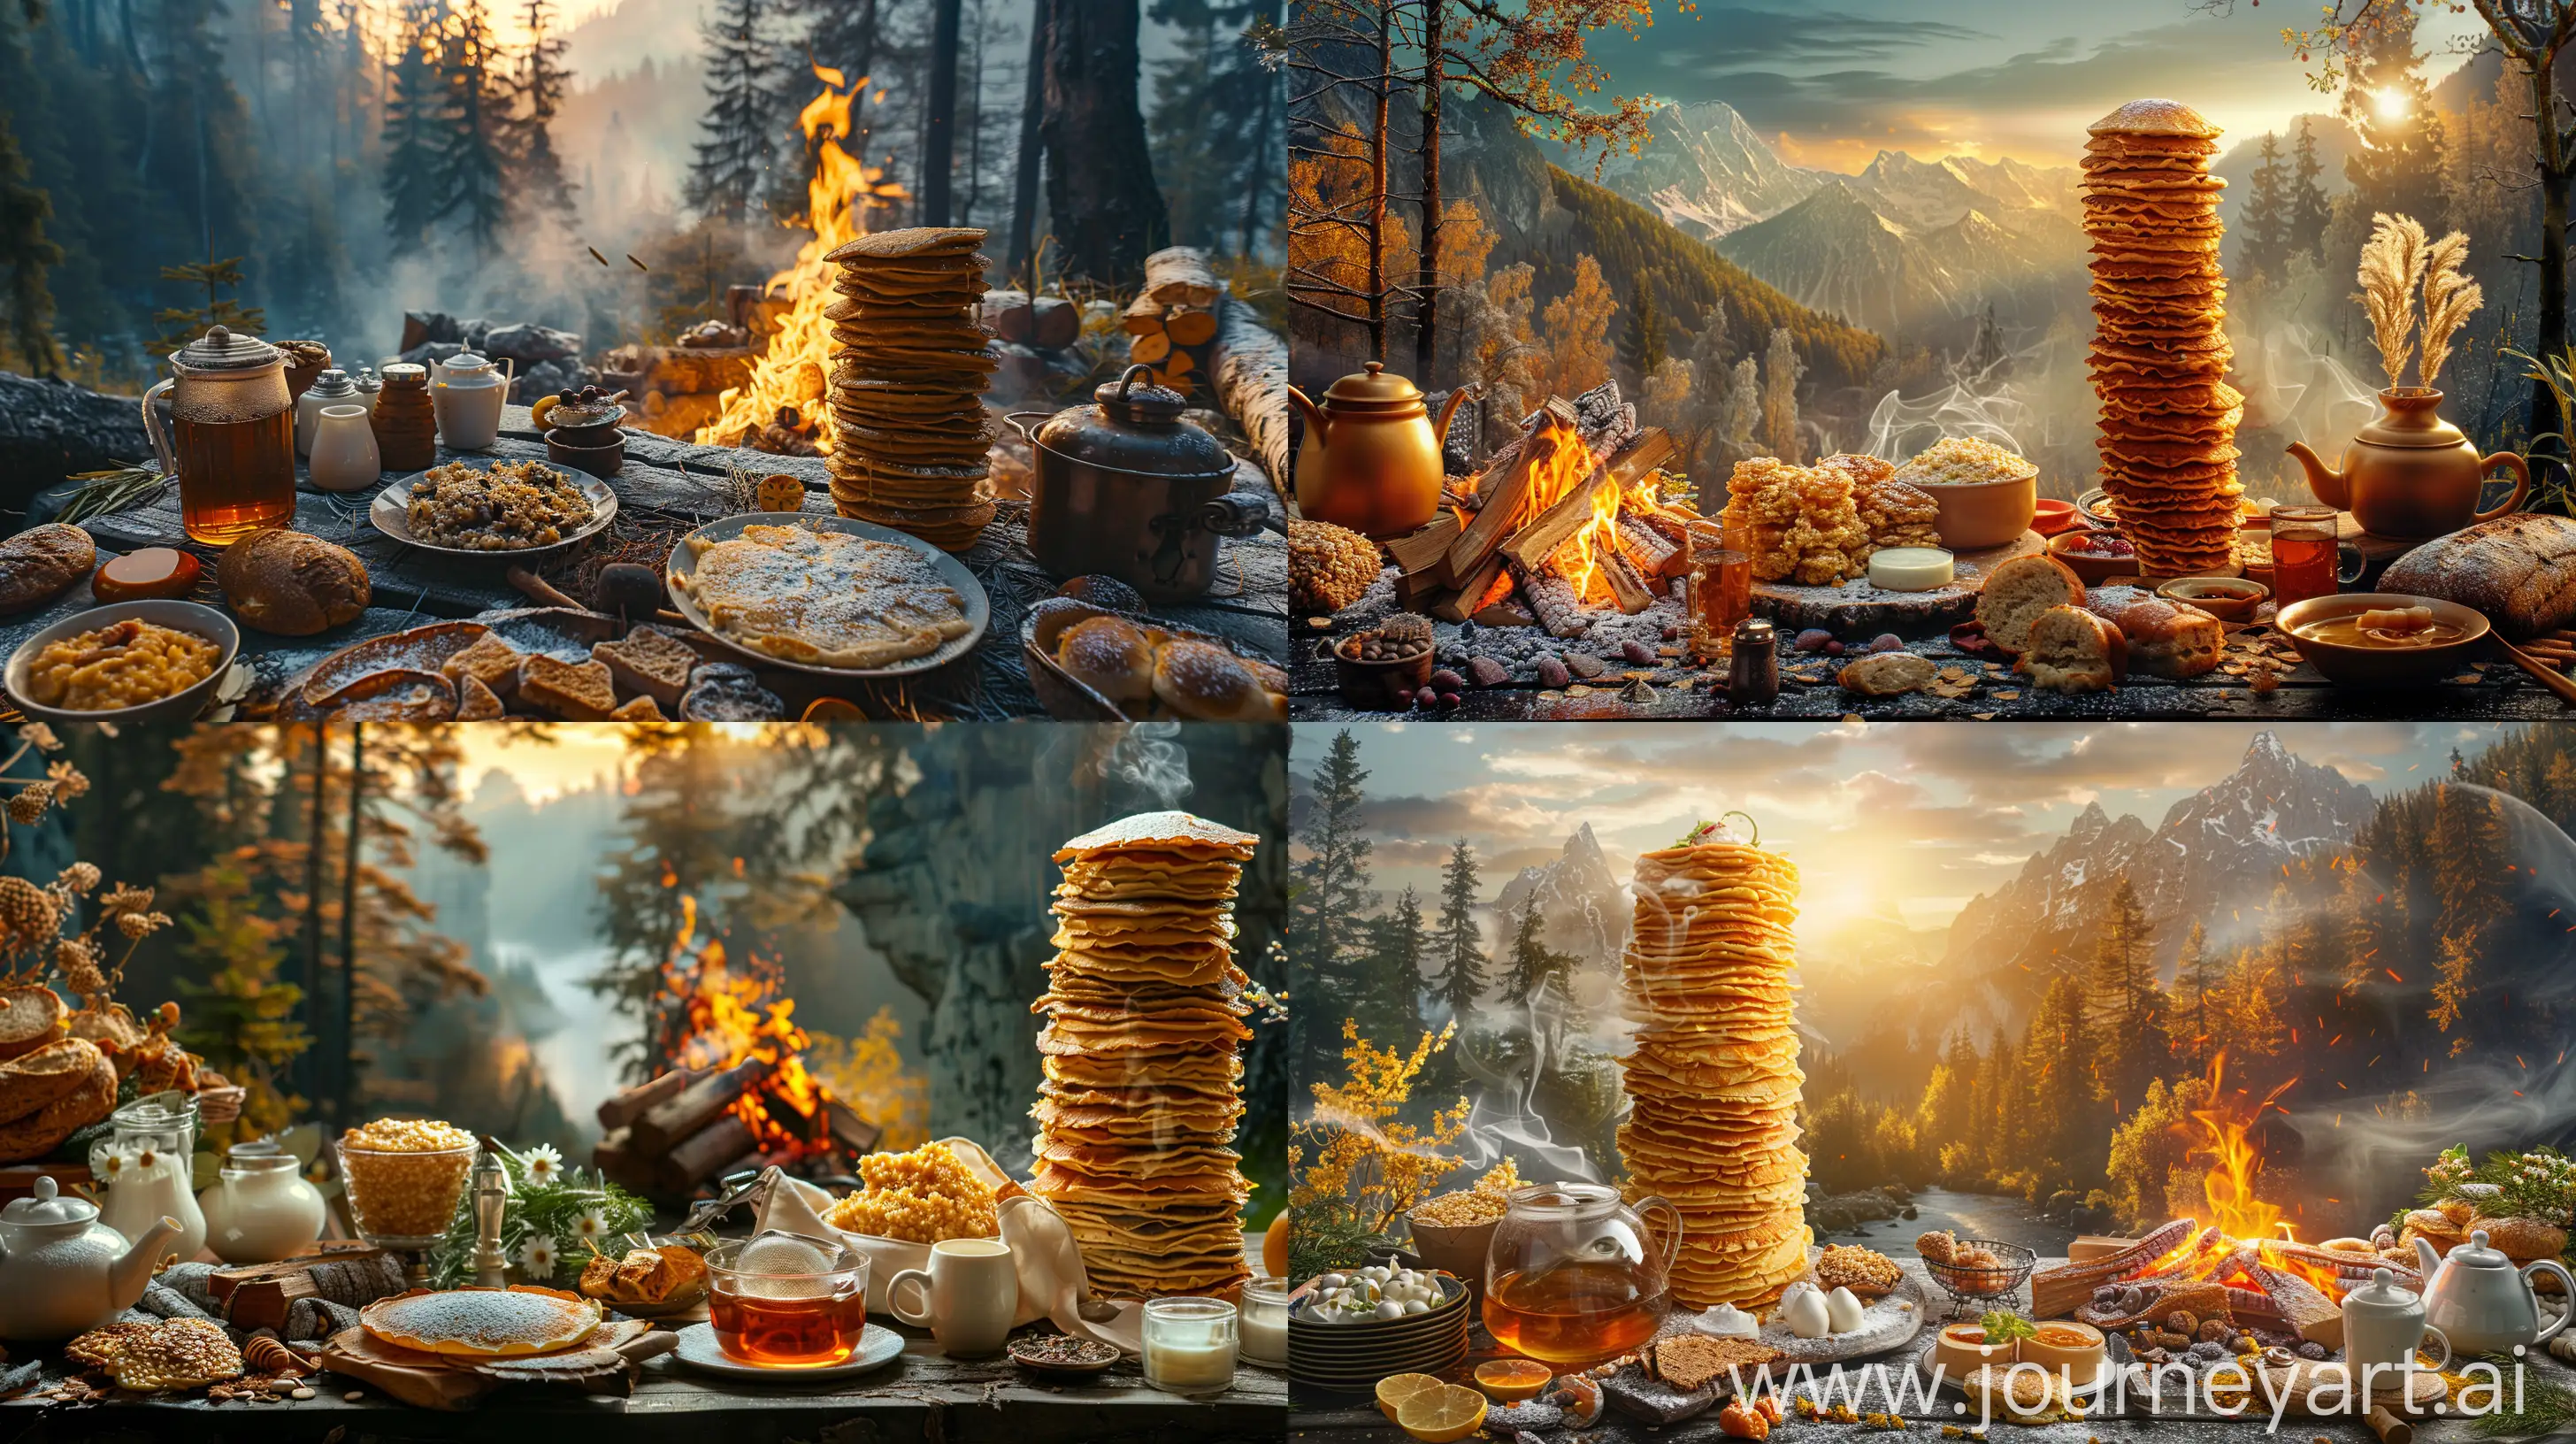 Mountain-Sunrise-Breakfast-Rich-Country-Morning-Feast-in-the-Wild-Forest